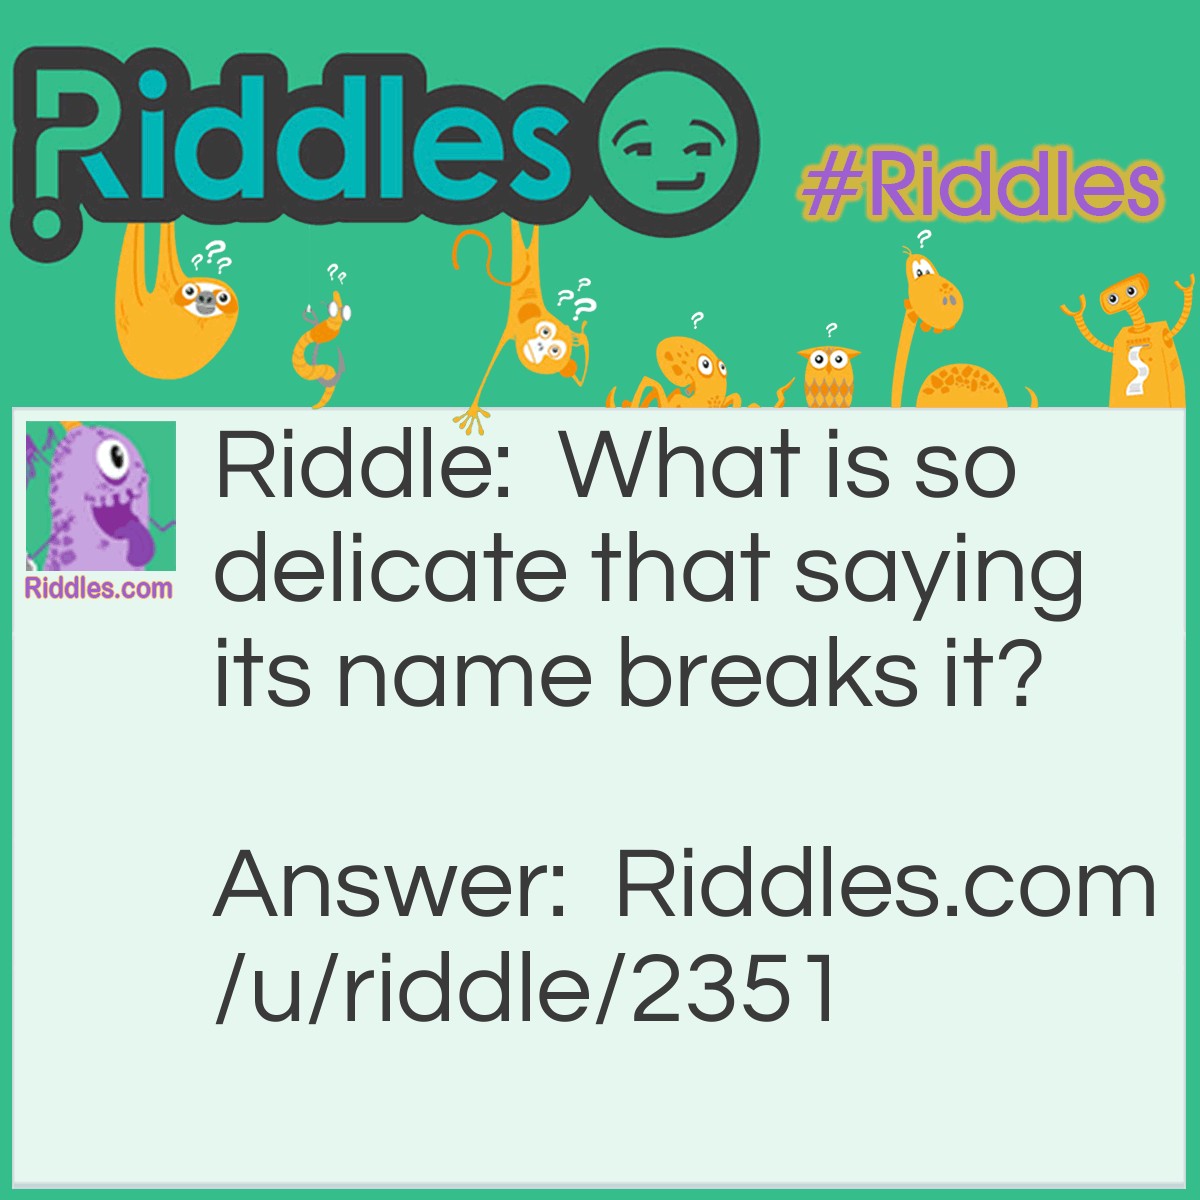 Riddle: What is so delicate that saying its name breaks it? Answer: Silence.